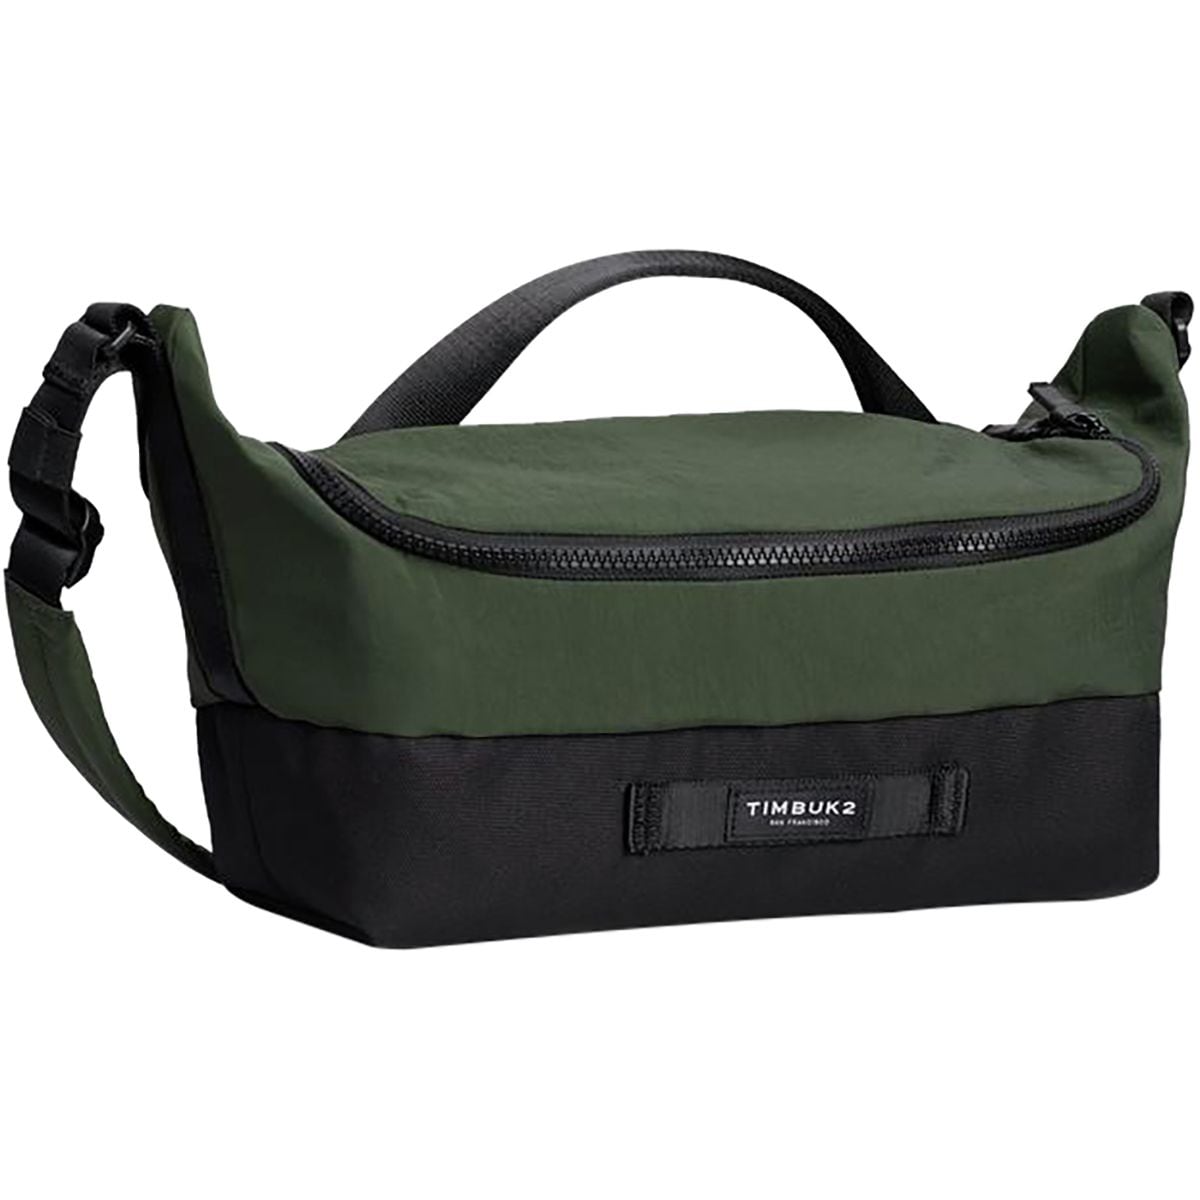 Timbuk2 Informant camera bag review: Little camera bag with lots of space -  CNET